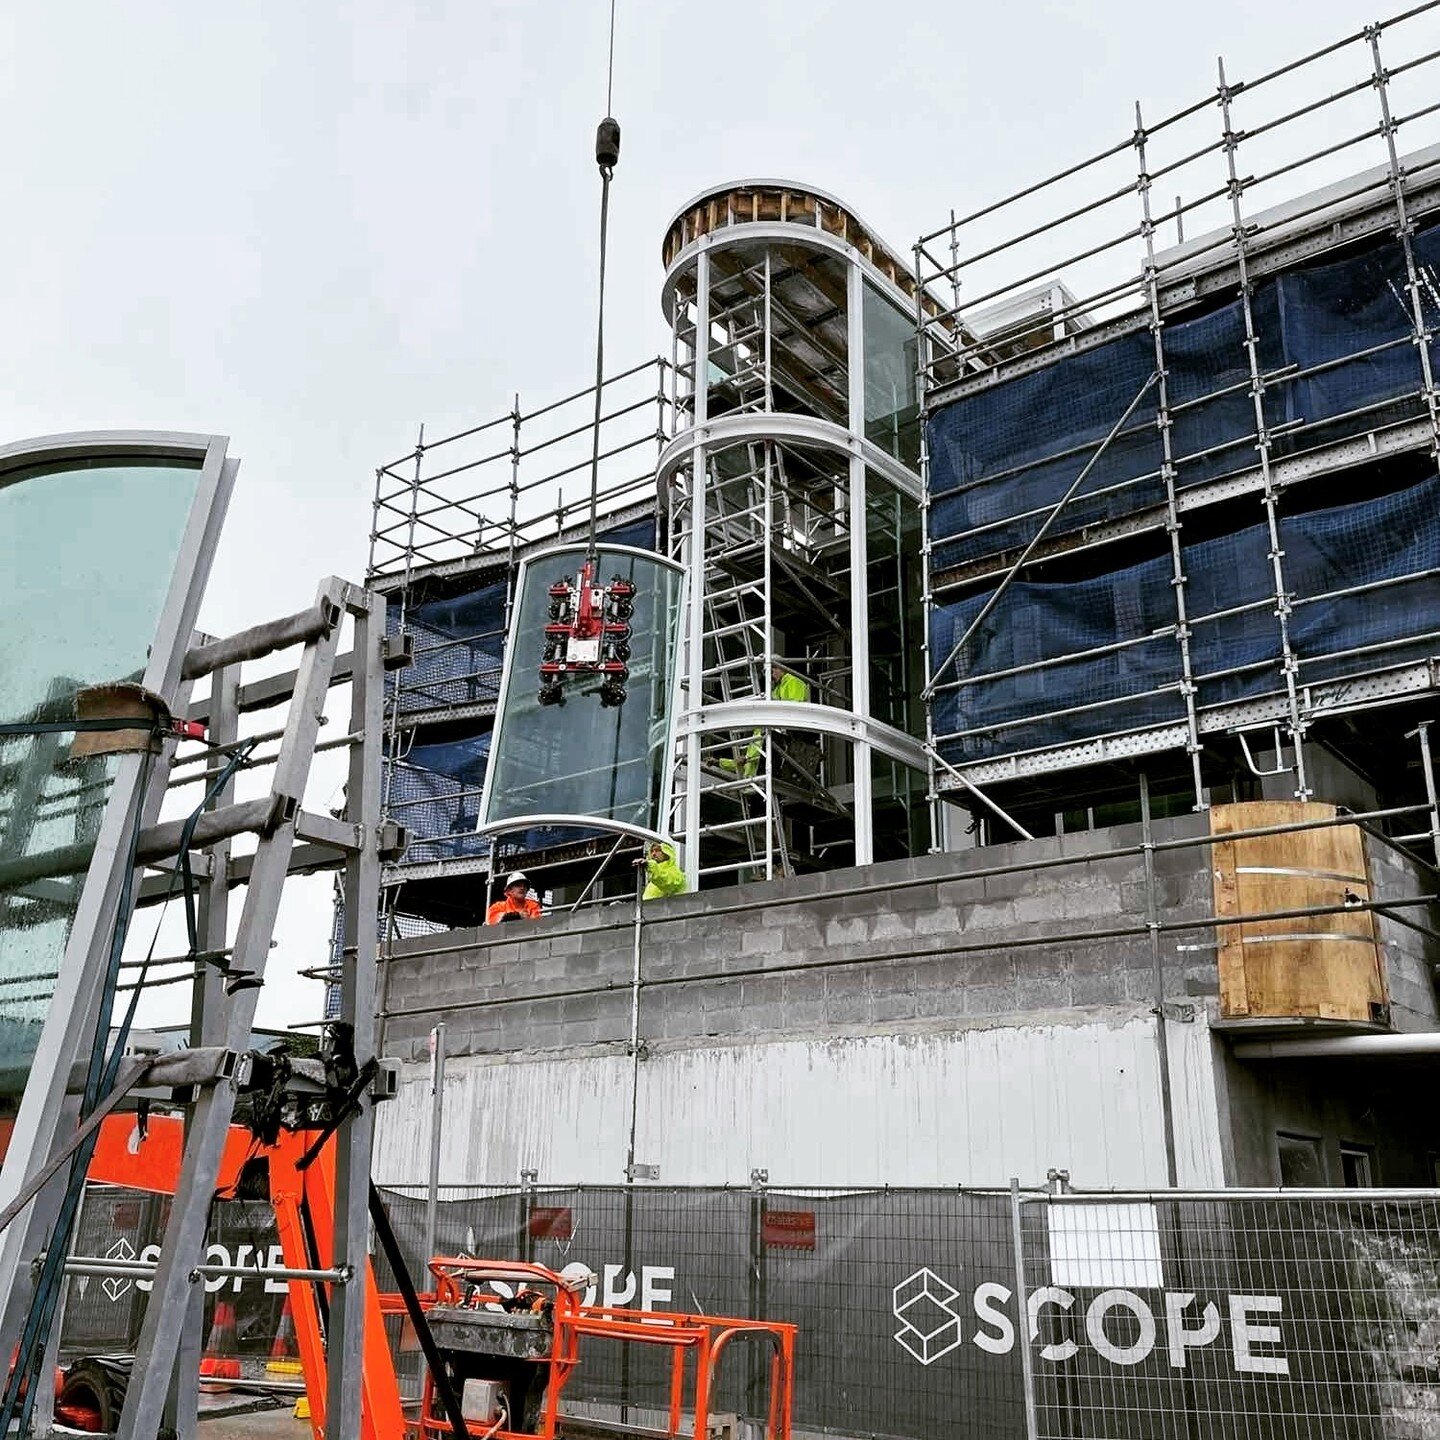 Construction doesn't stop despite some rain! Collaboration with @make.windows_doors for curved glass install this week at our #wickham Newcastle project.